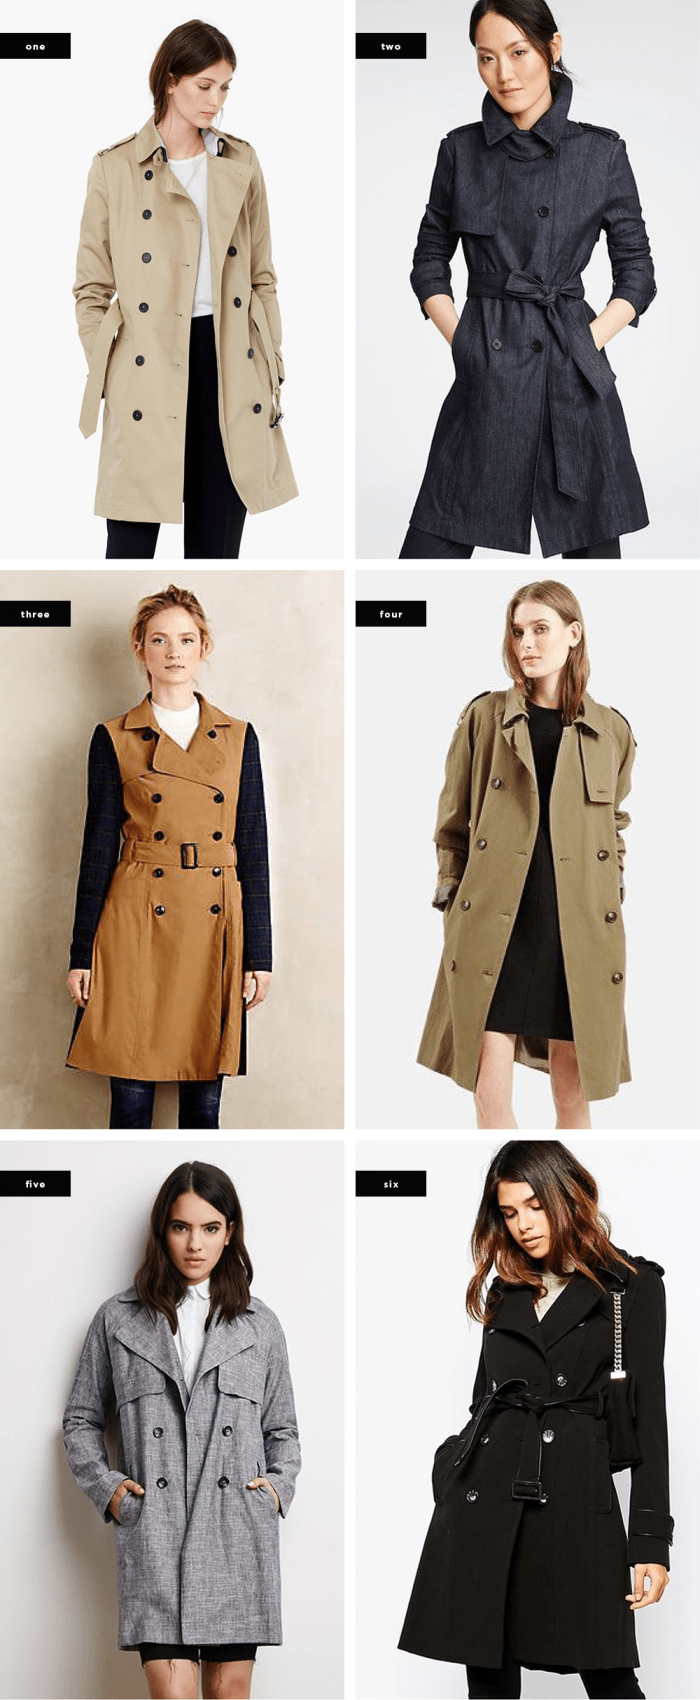 Stylish Trench Coats That Are Great Fall Wardrobe Staples - Verily